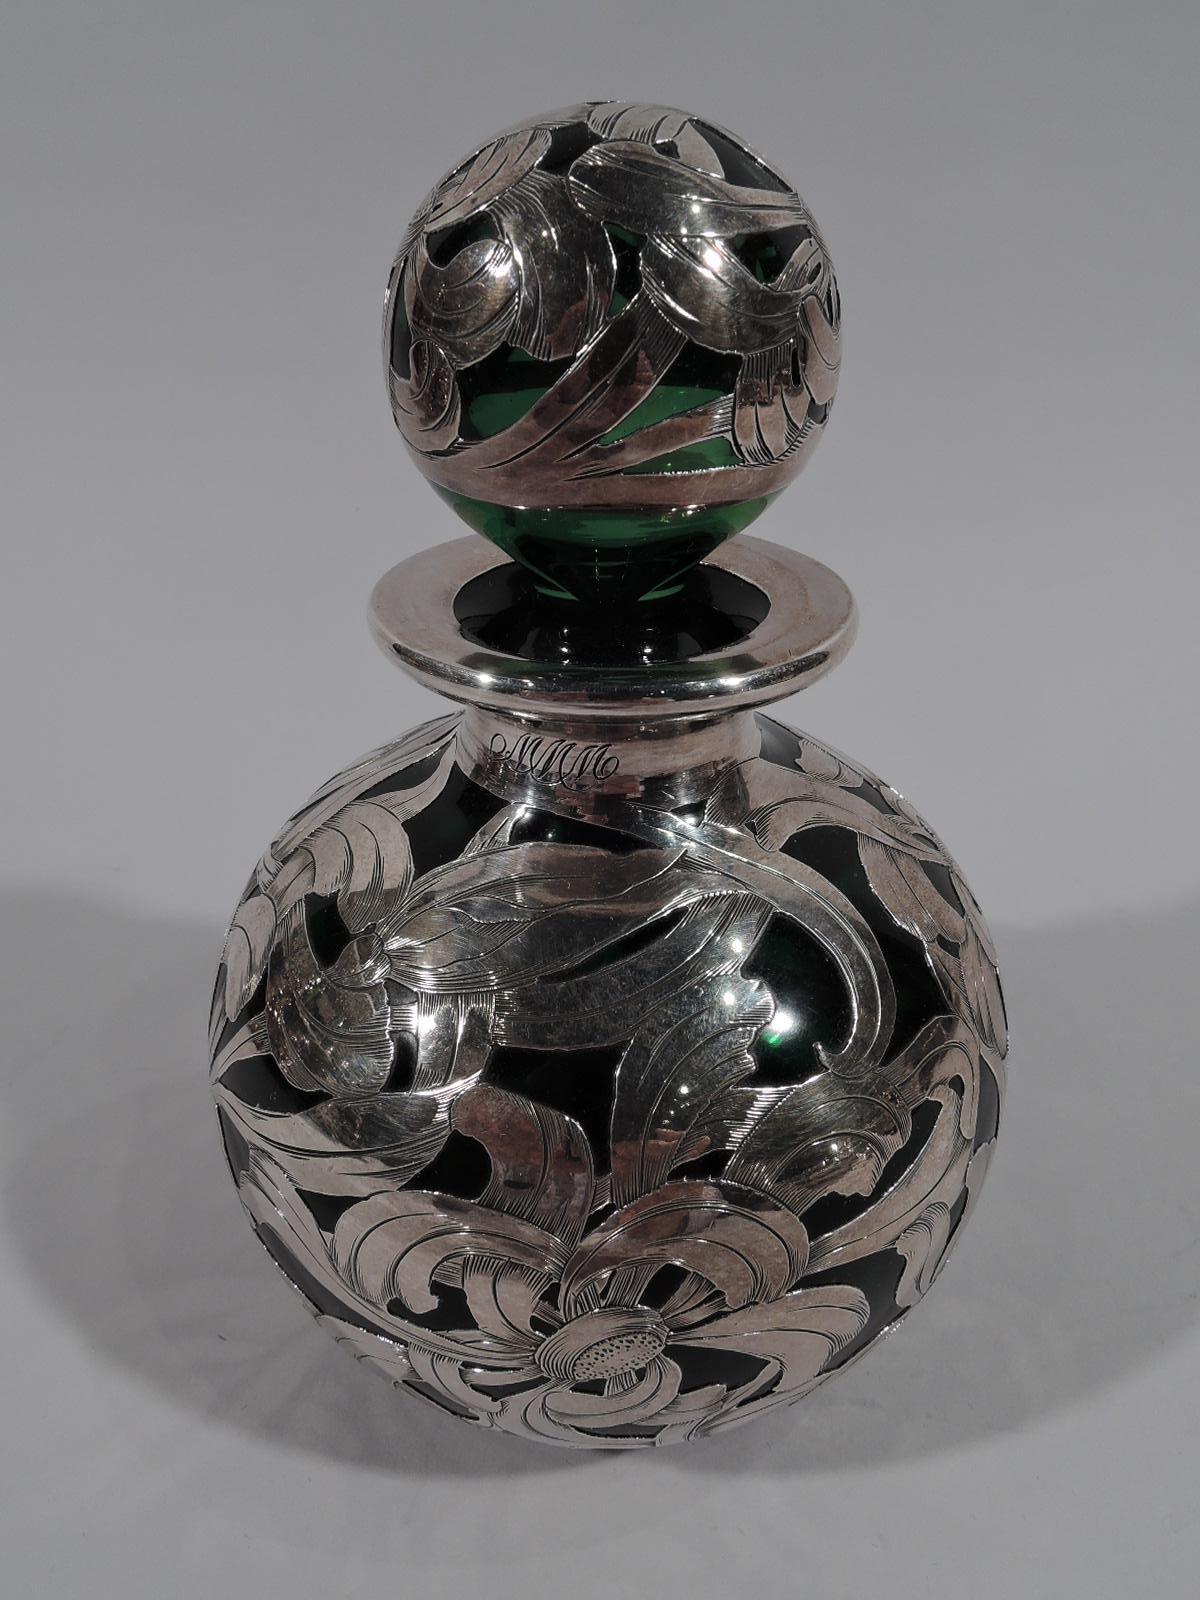 Turn-of-the-century American Art Nouveau green plasss perfume bottle with engraved silver overlay. Globular with short neck and everted rim in collar. Ball stopper. Overlay in dense and dynamic flower head pattern with interlaced and overlapping